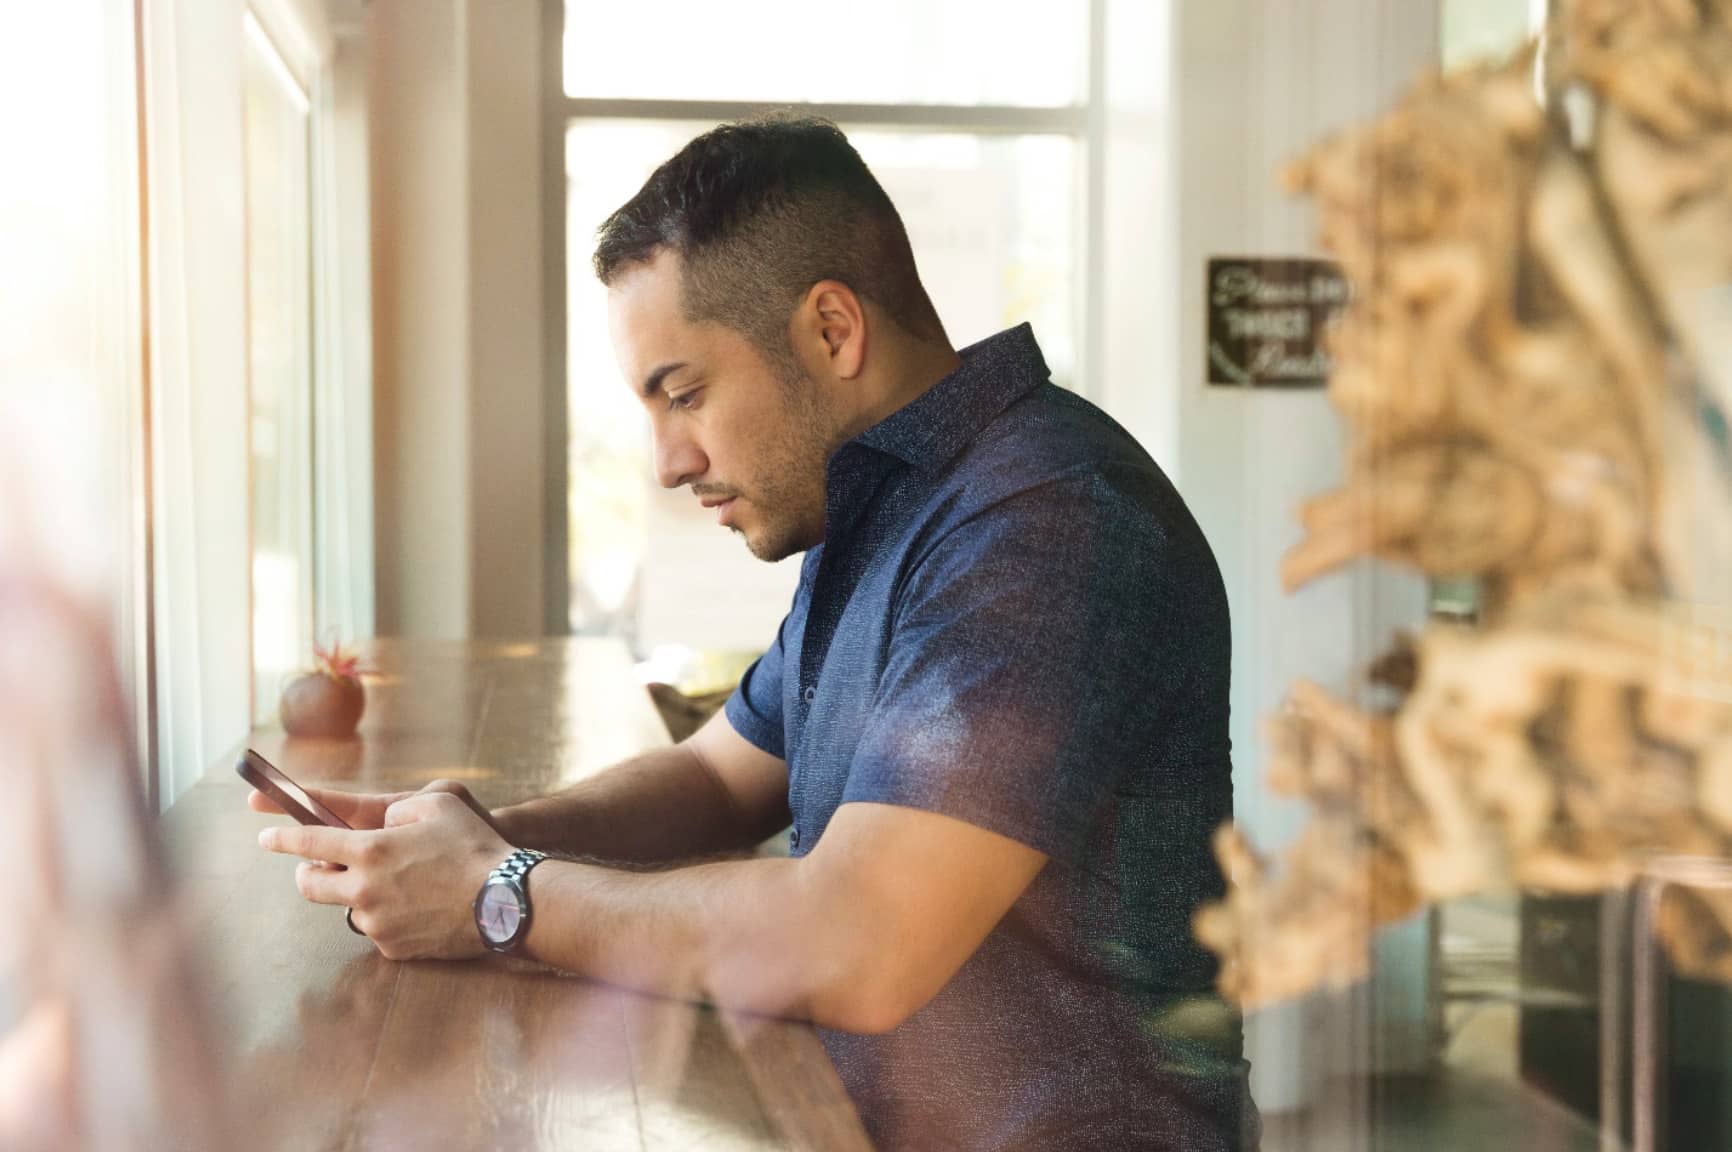 Man in blue button-down shirt with watch on checking phone at coffee shop counter for alert from worksite